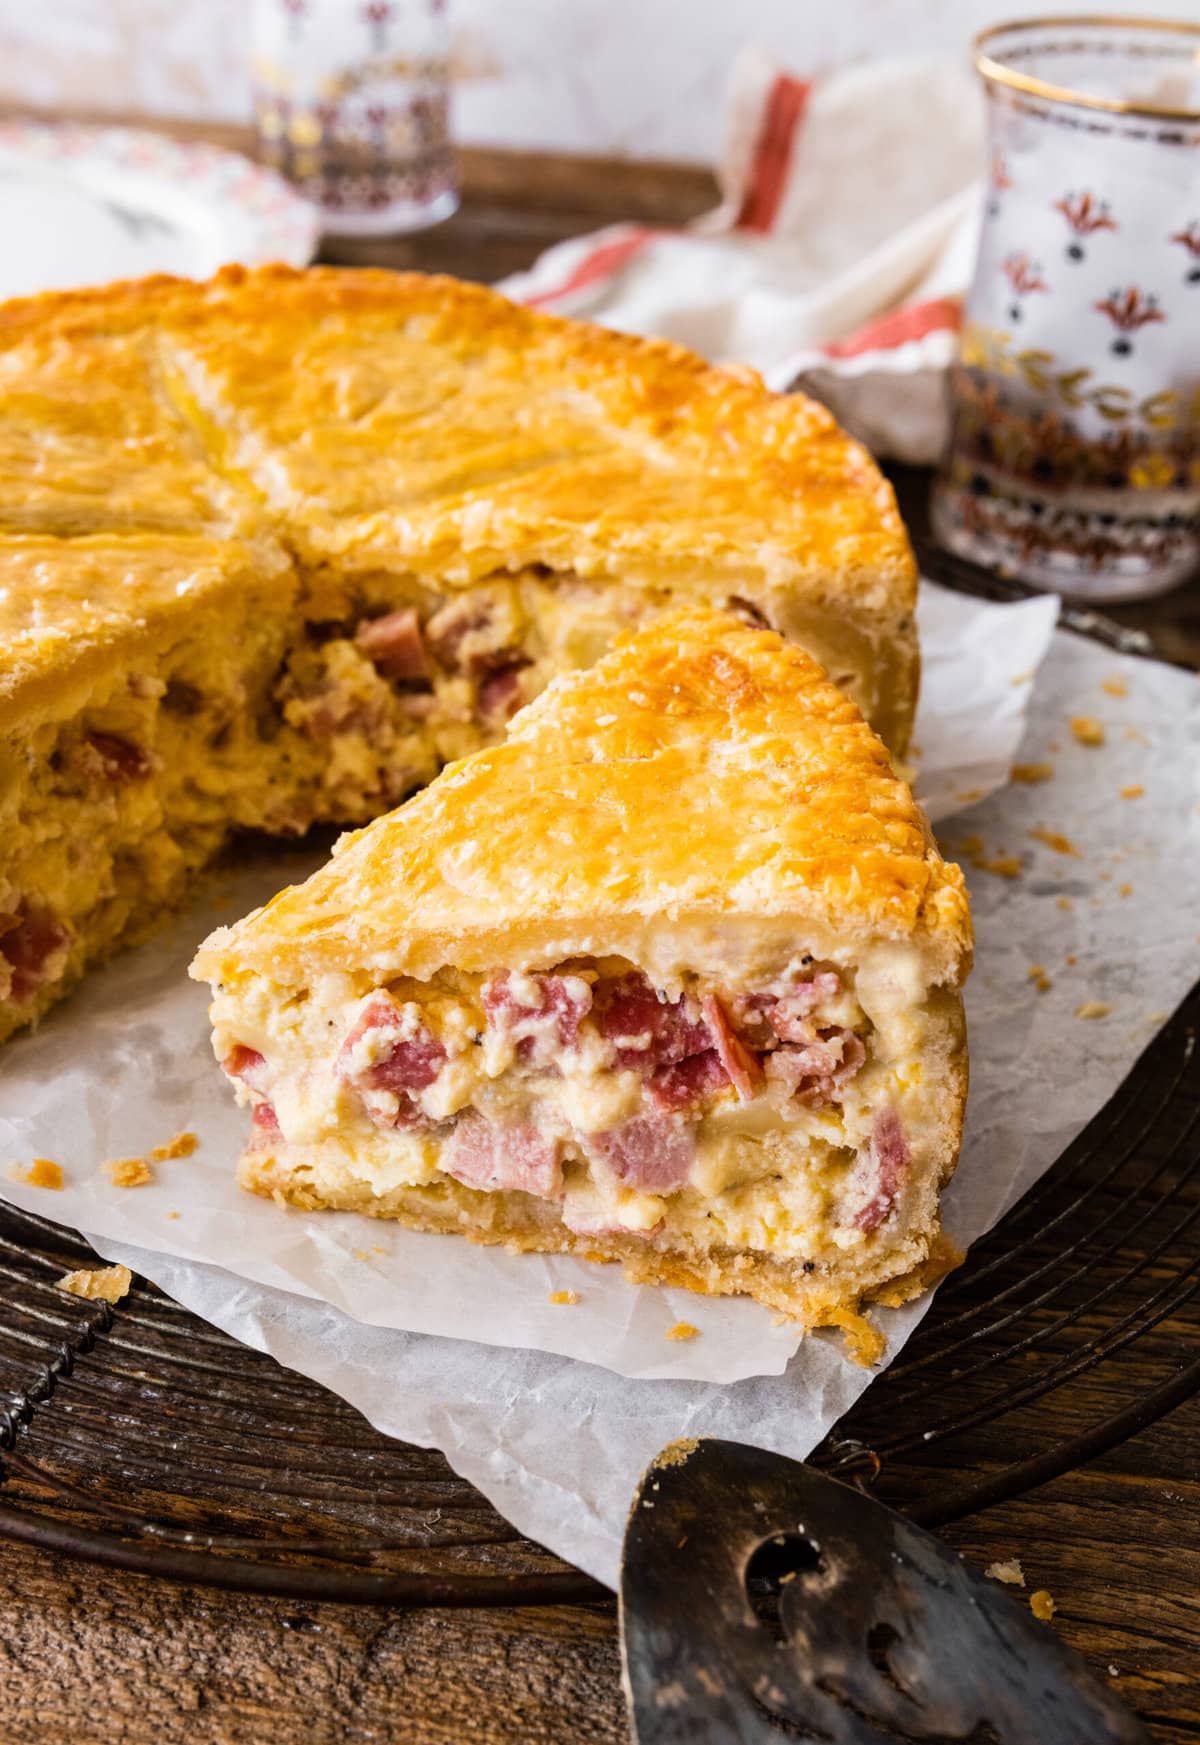 one piece of the pizza rustica pie shown to see the inside layers.